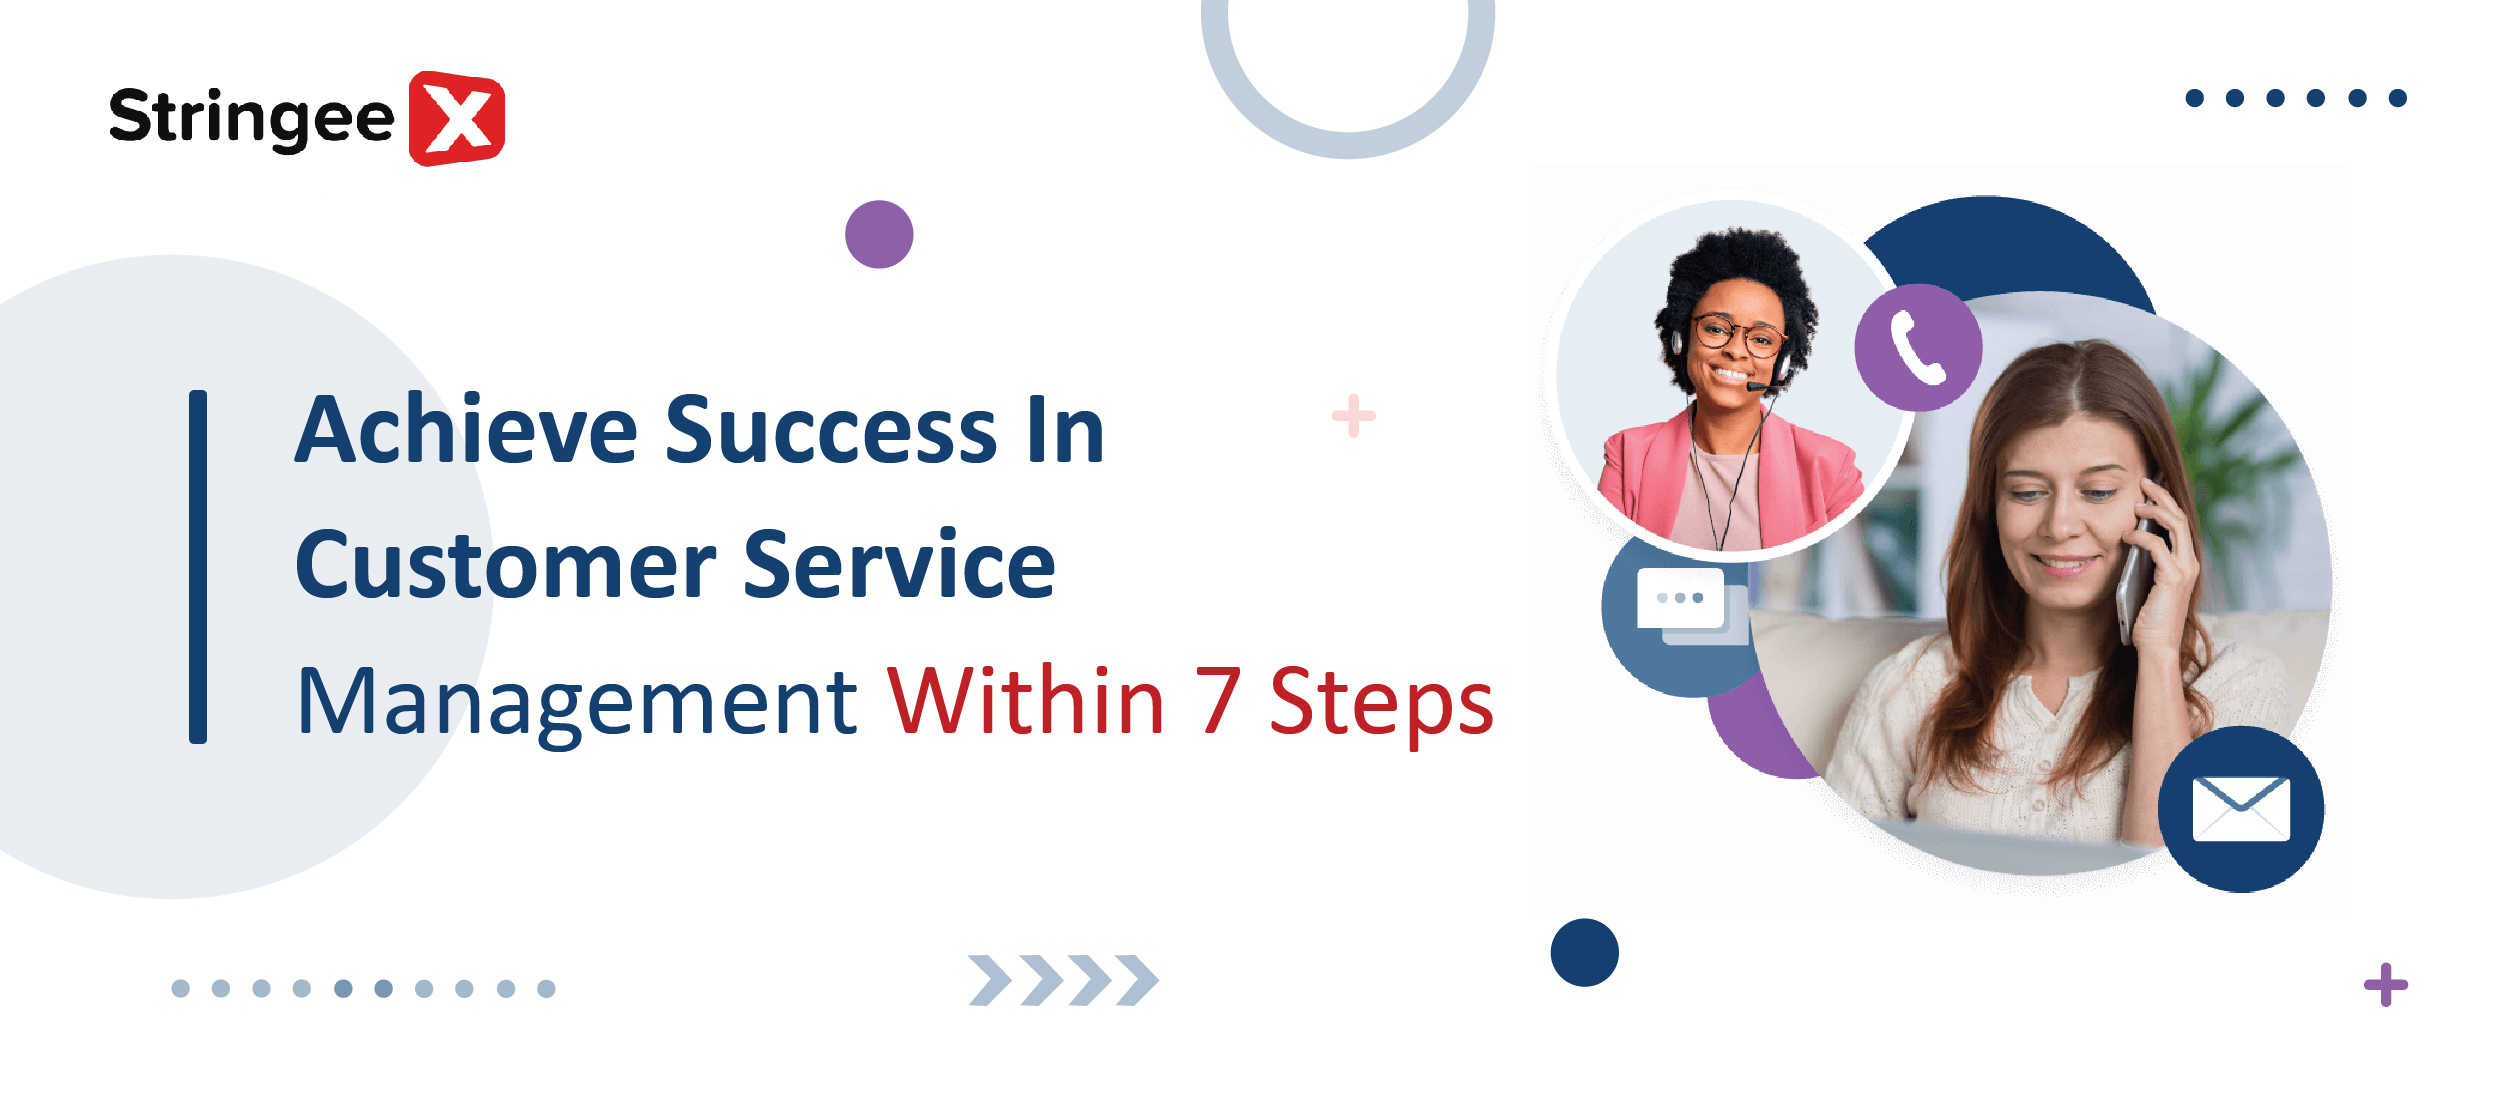 How To Achieve Success In Customer Service Management Within 7 Steps